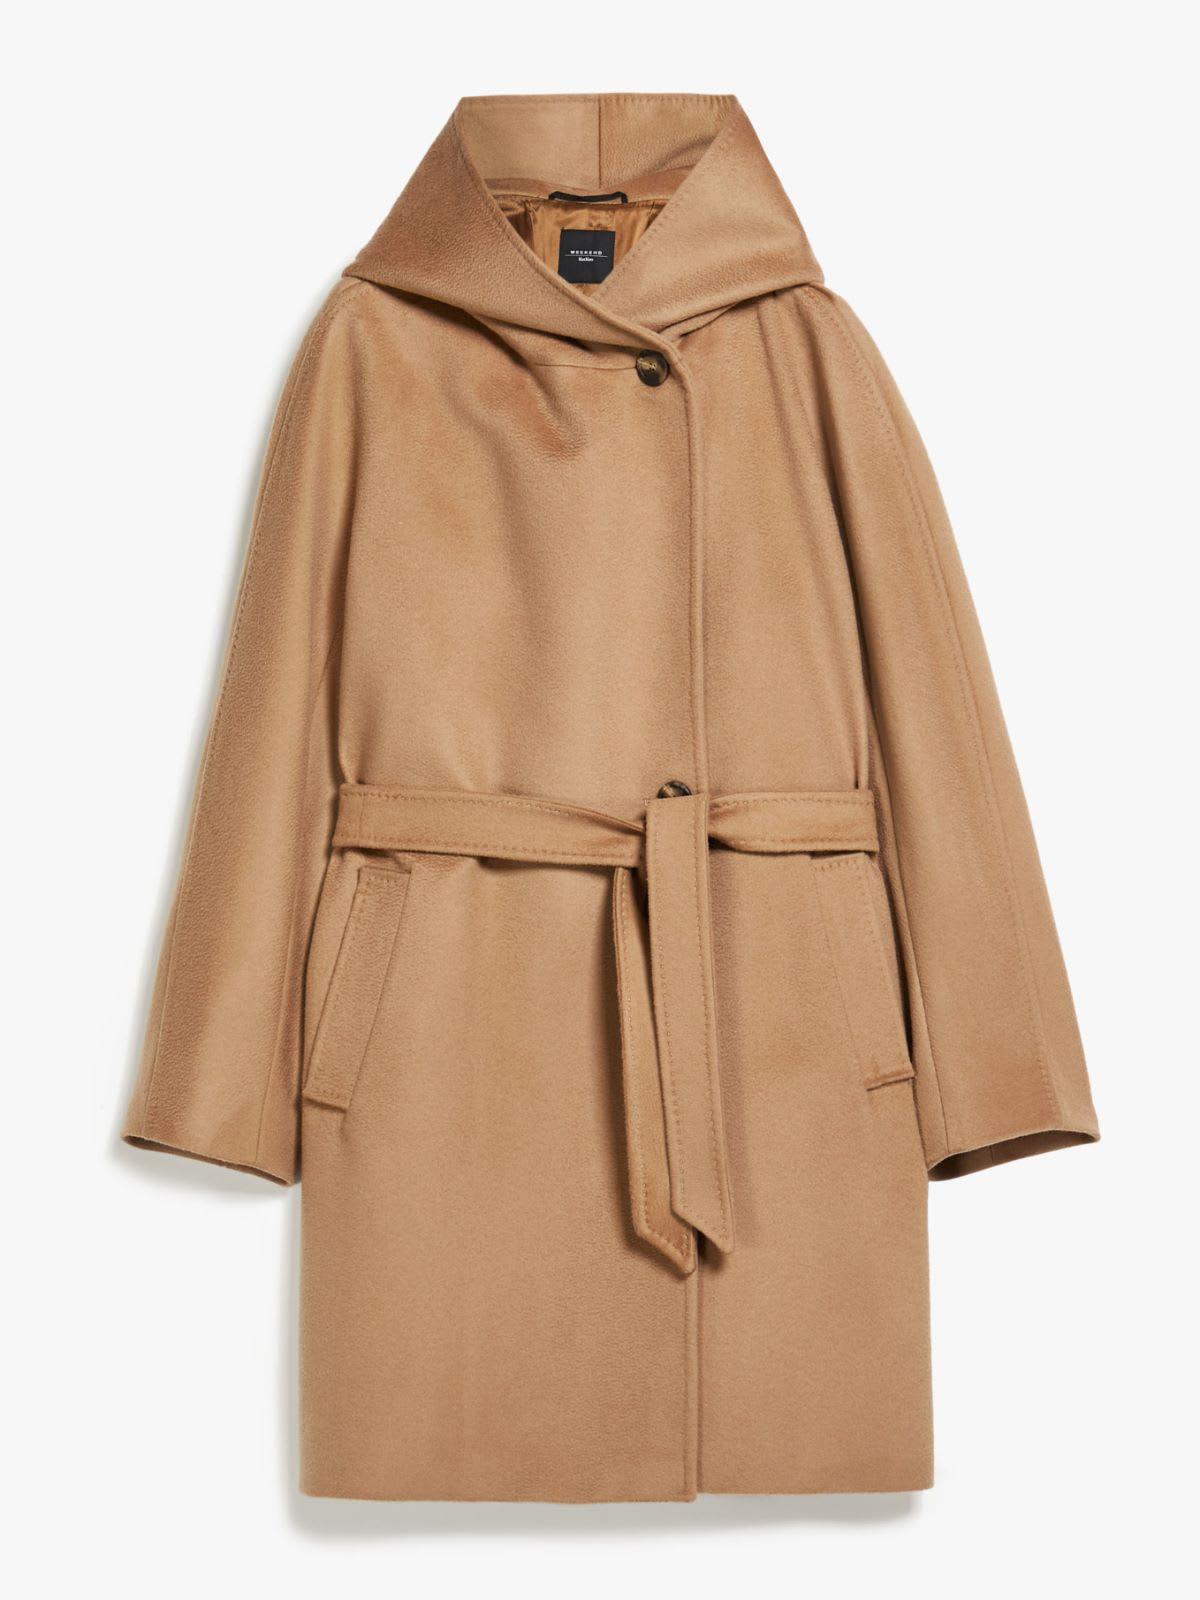 Vergevingsgezind Ophef Anoniem Weekend by Maxmara Other Materials Coat in Natural | Lyst